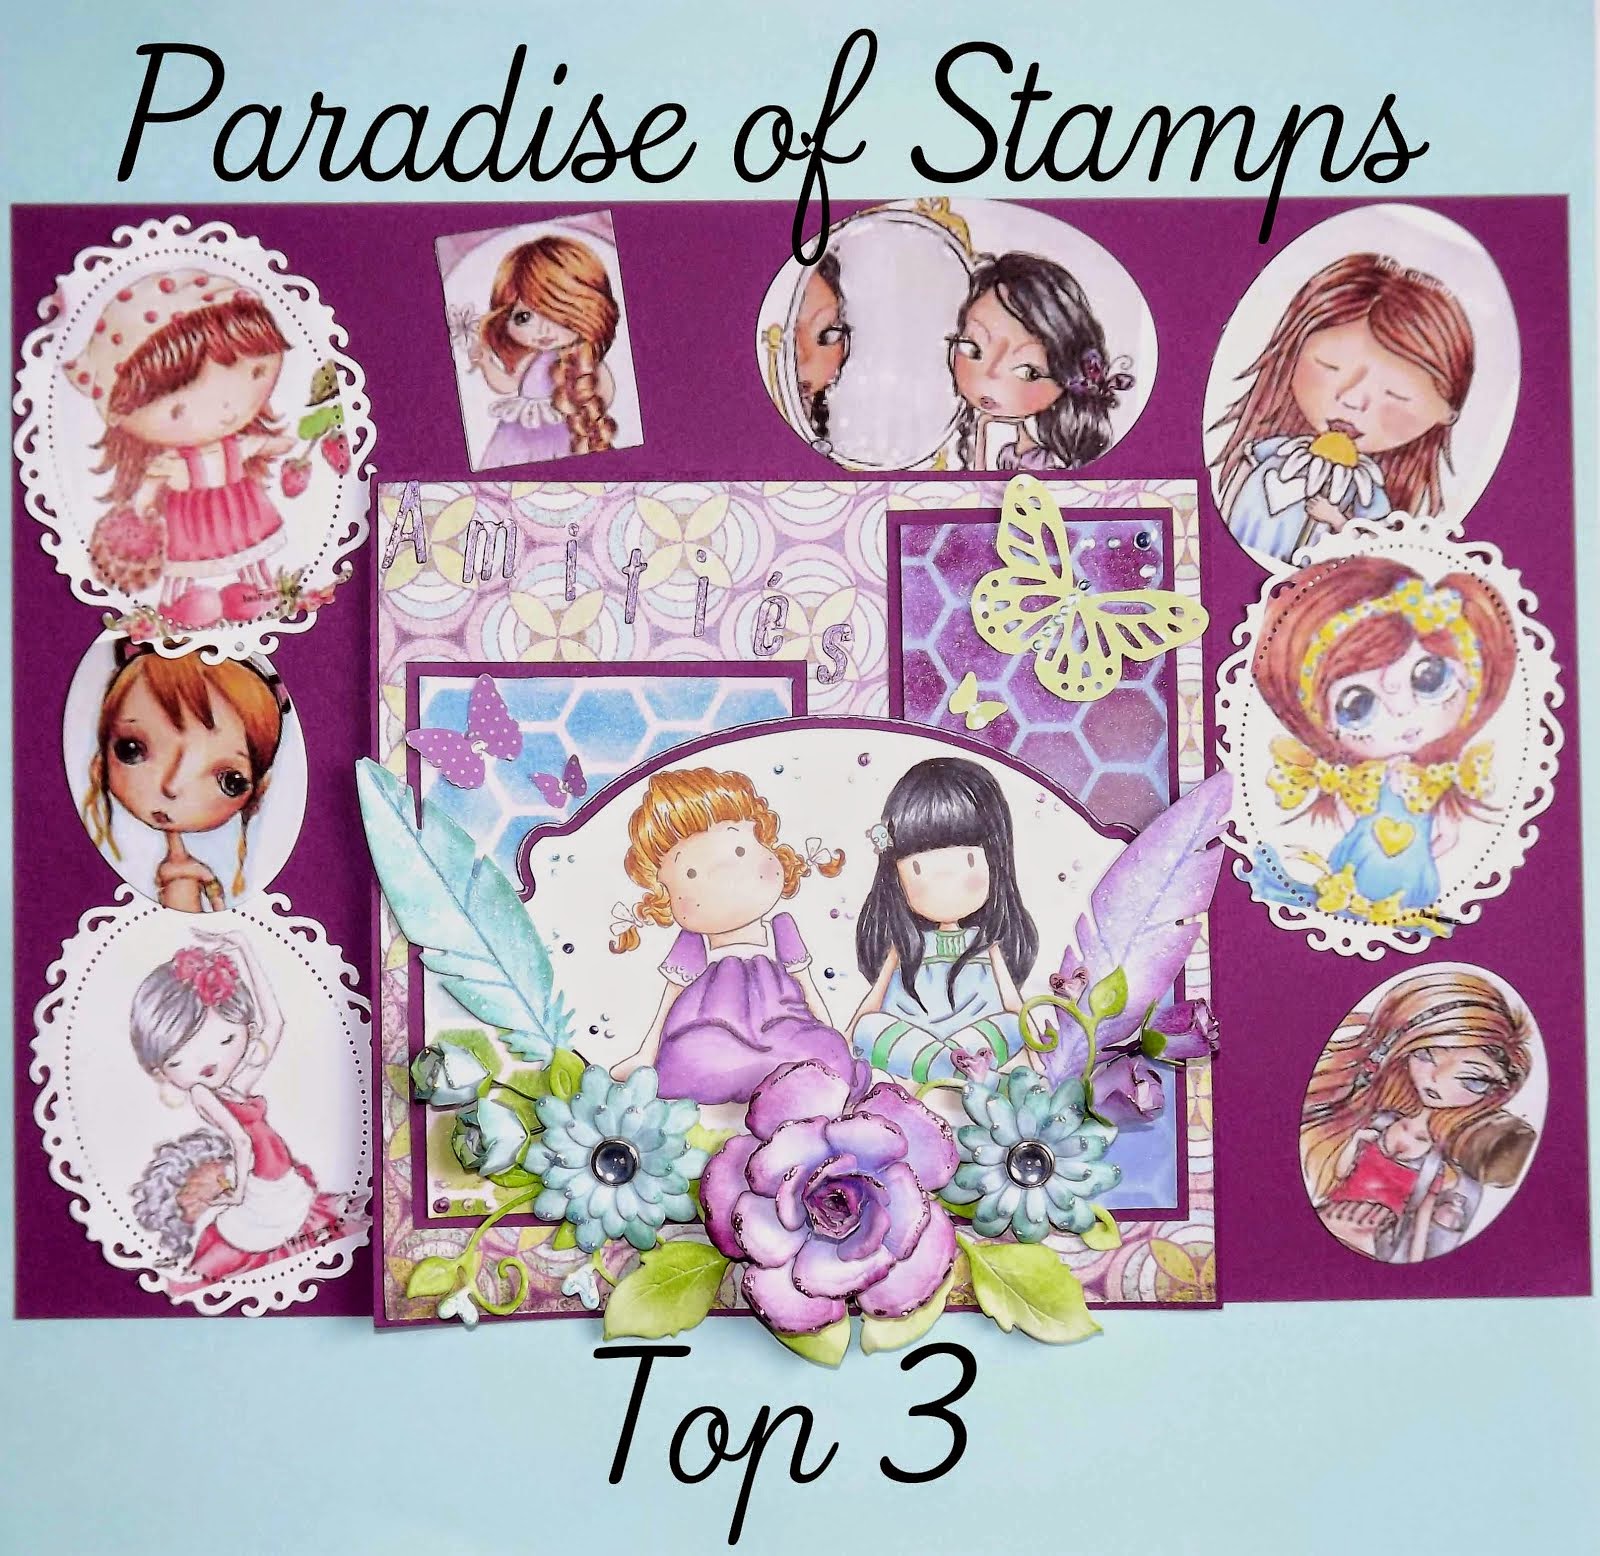 Top 3 Paradise of Stamps